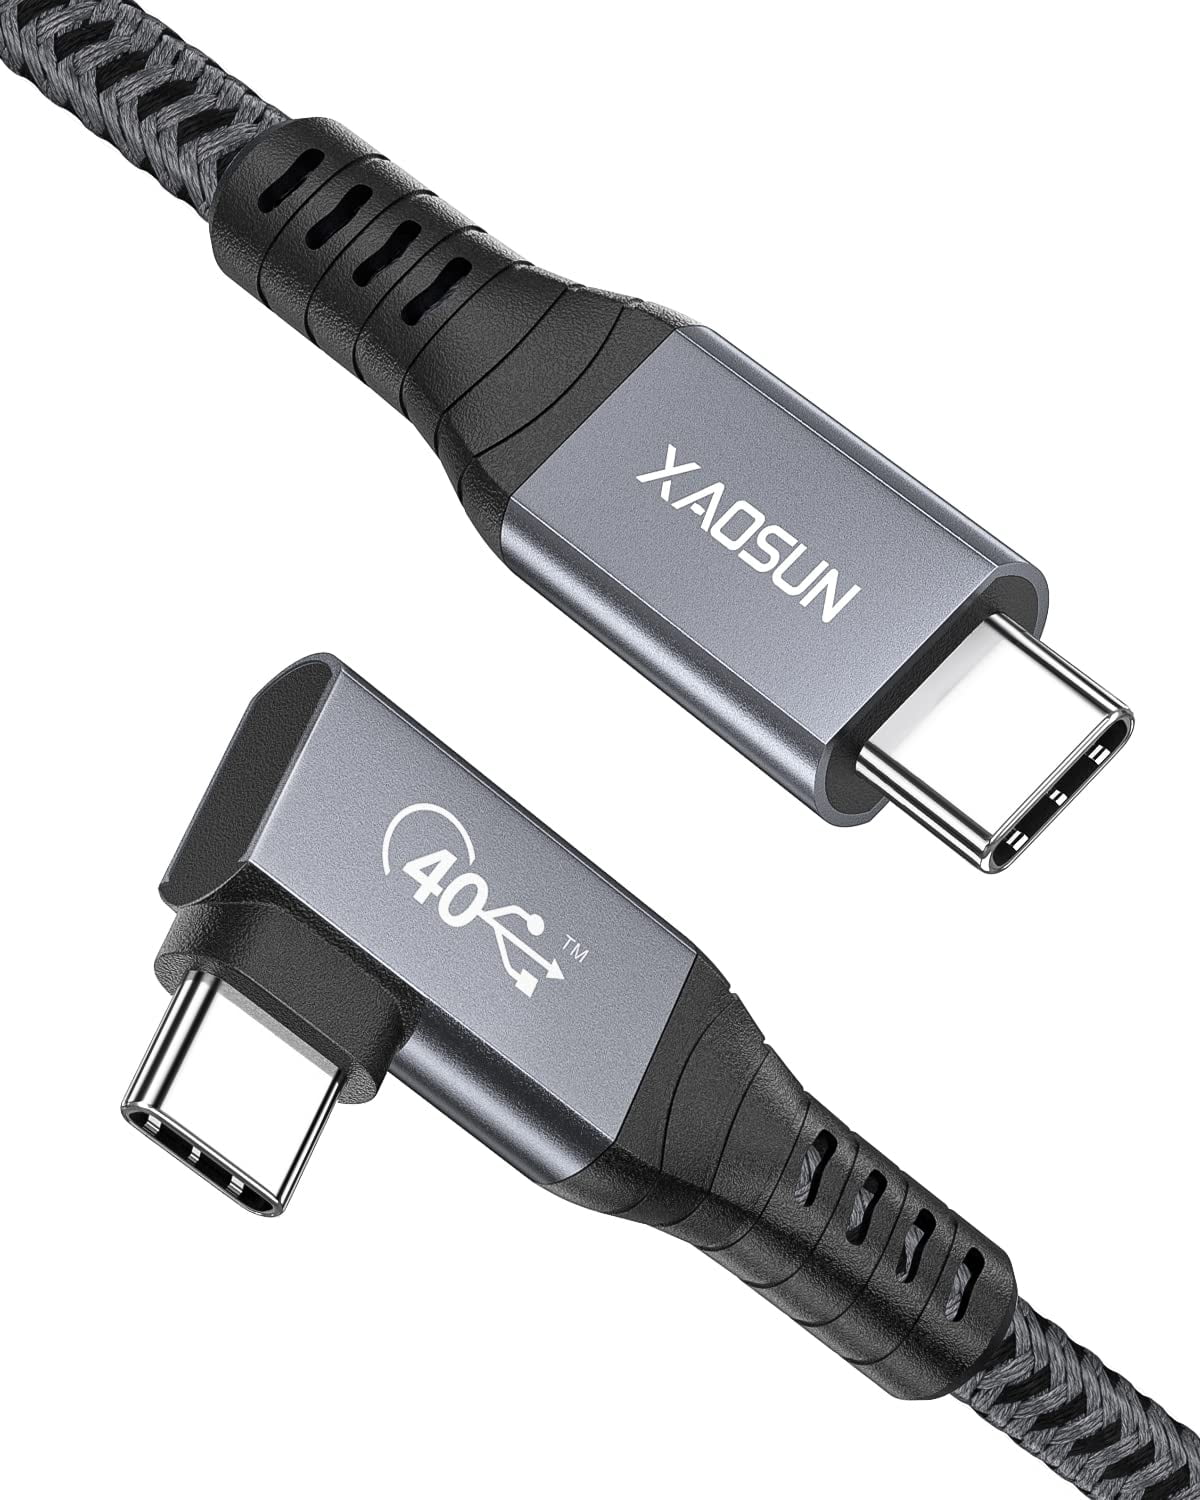 Best Thunderbolt 4 Cable, 8K 100W 40Gbps - FARSINCE